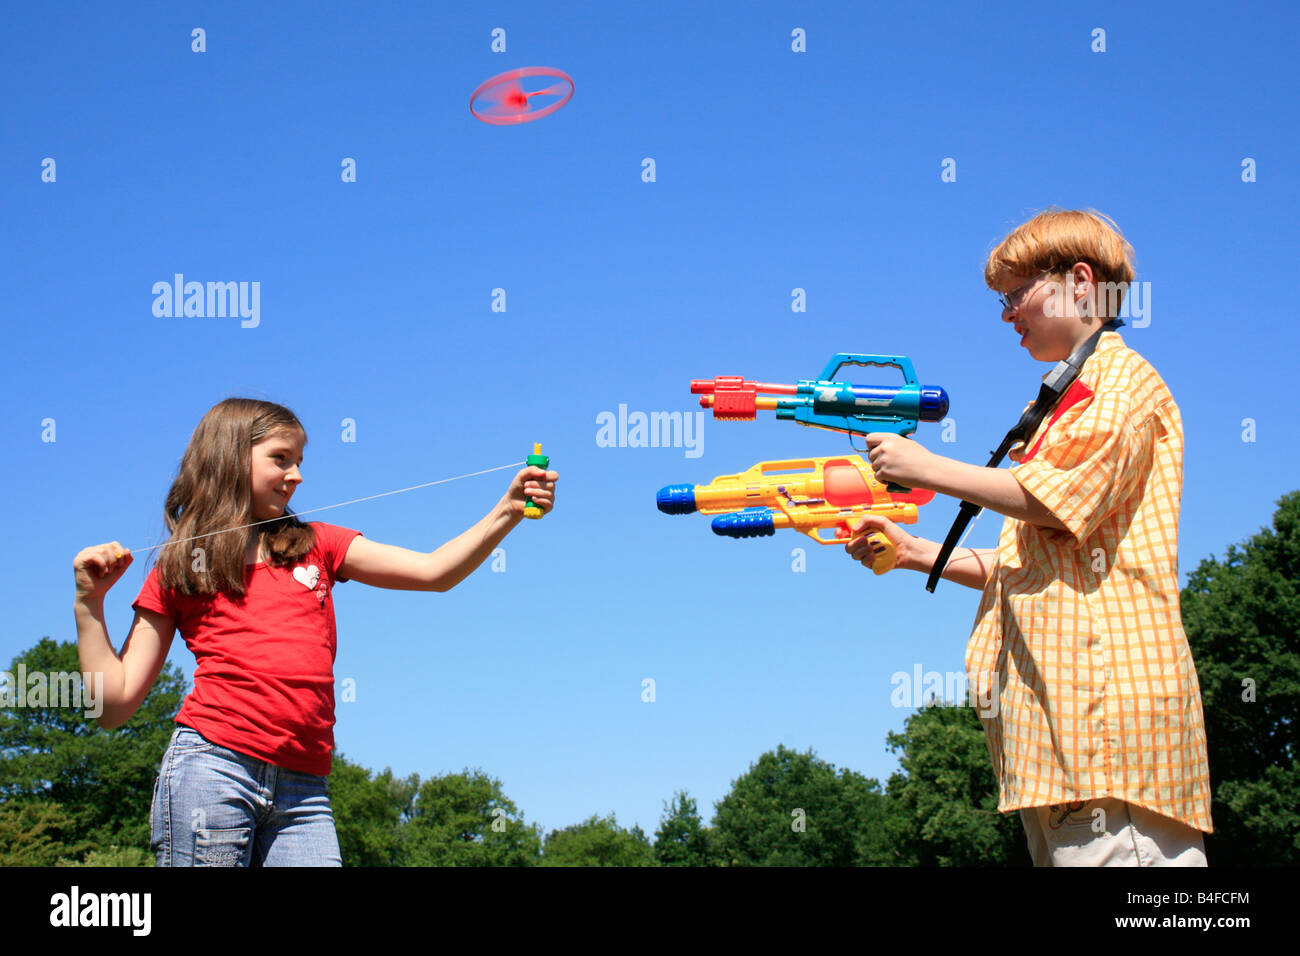 a young girl is playing with a toy helicopter while her brother is playing with toy guns Stock Photo